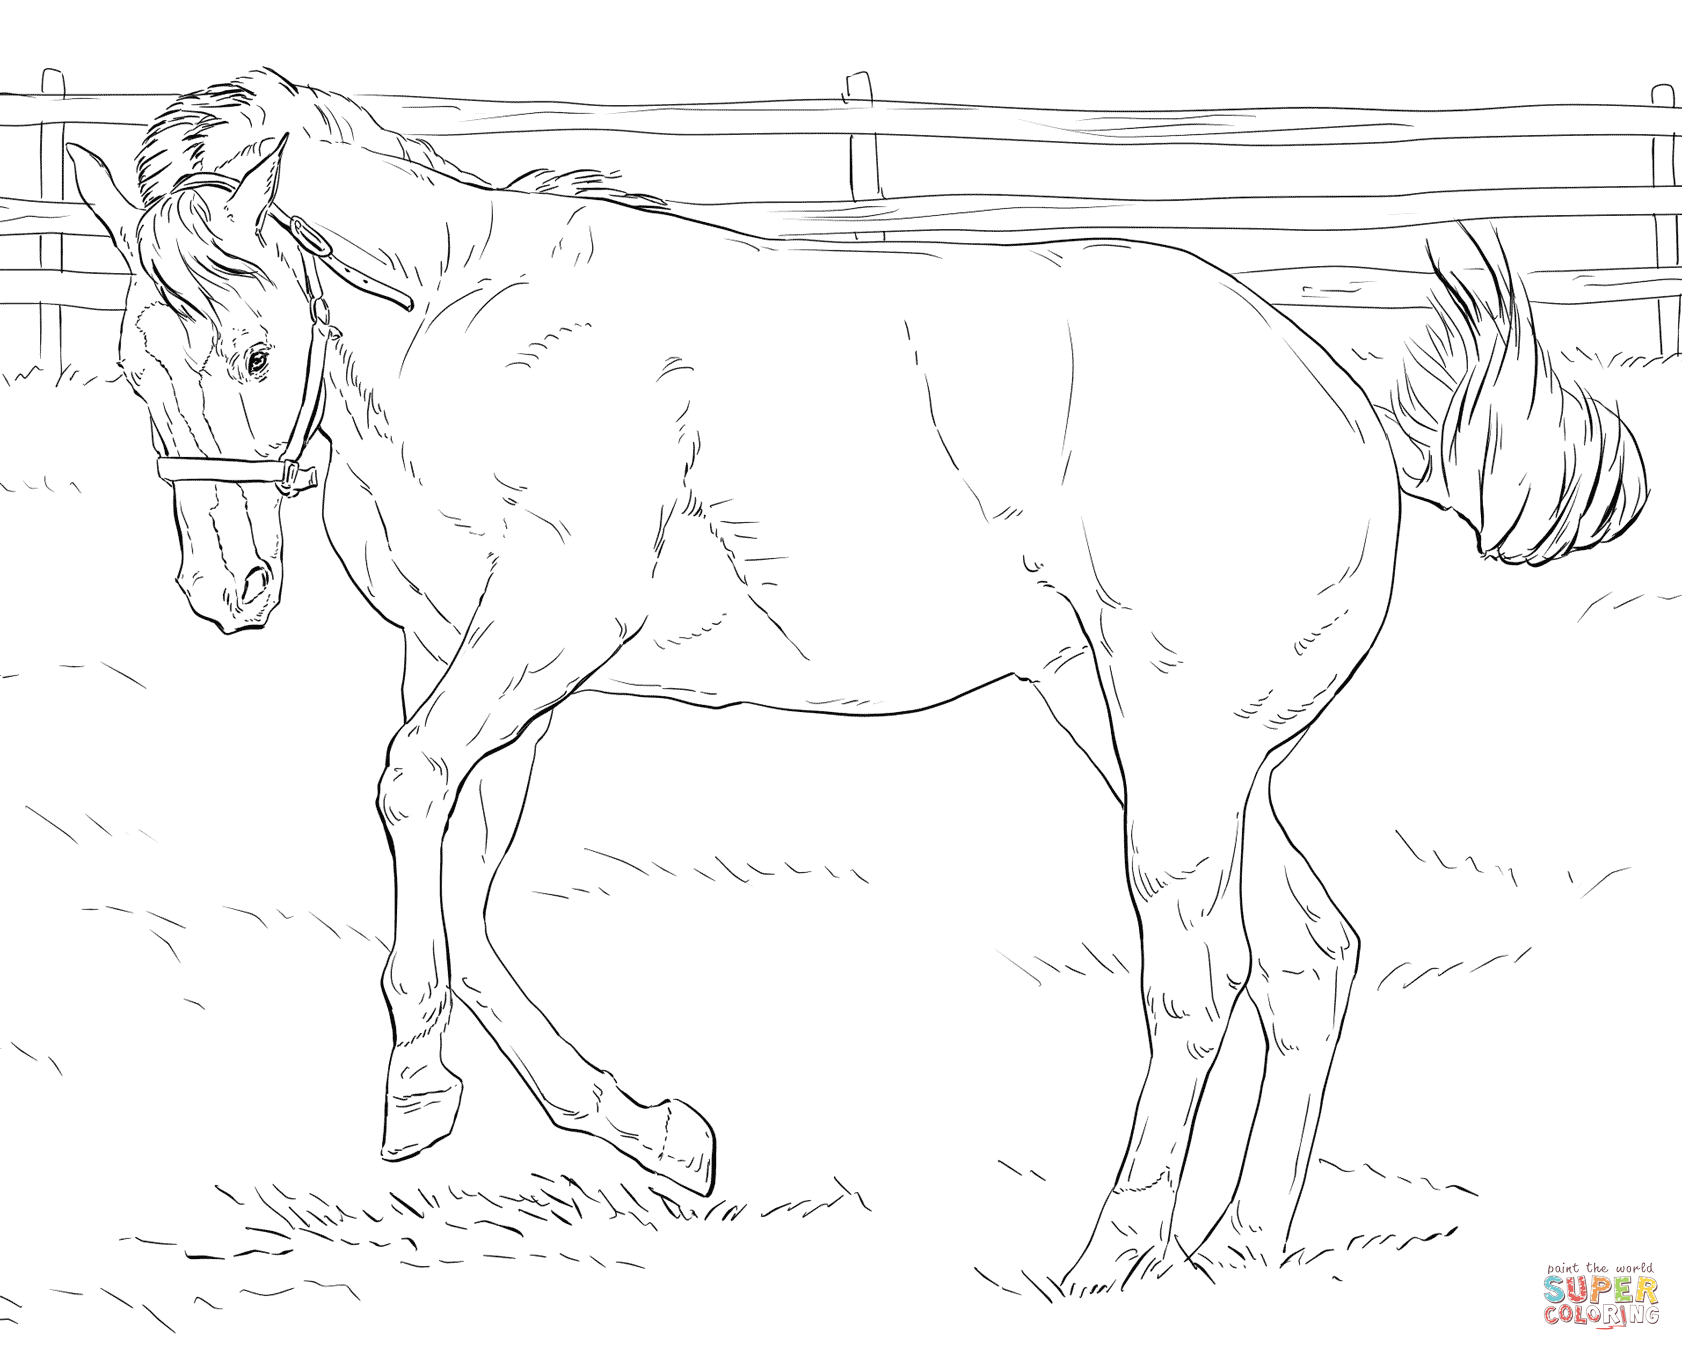 Bucking Horse coloring page | Free Printable Coloring Pages